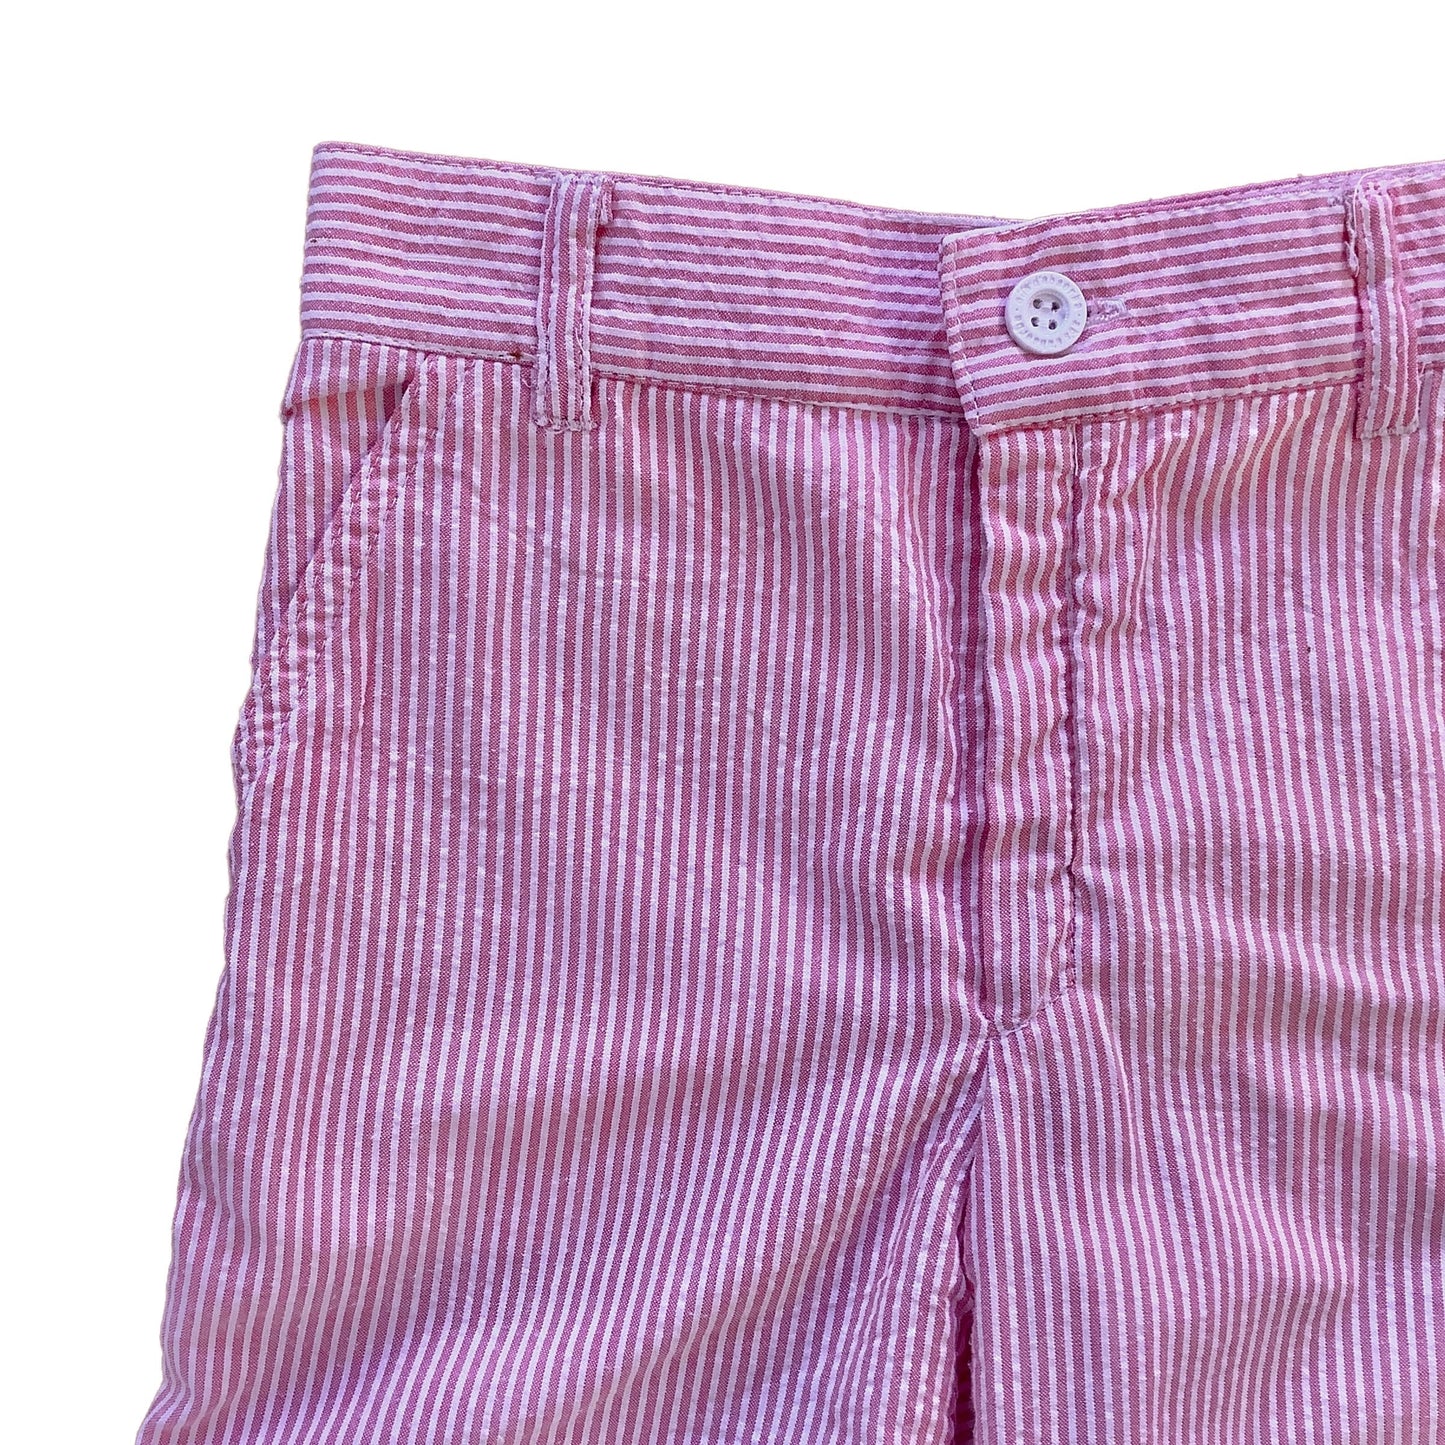 Vintage 1970's White/Pink Thinstripes Shorts 4-5 Years